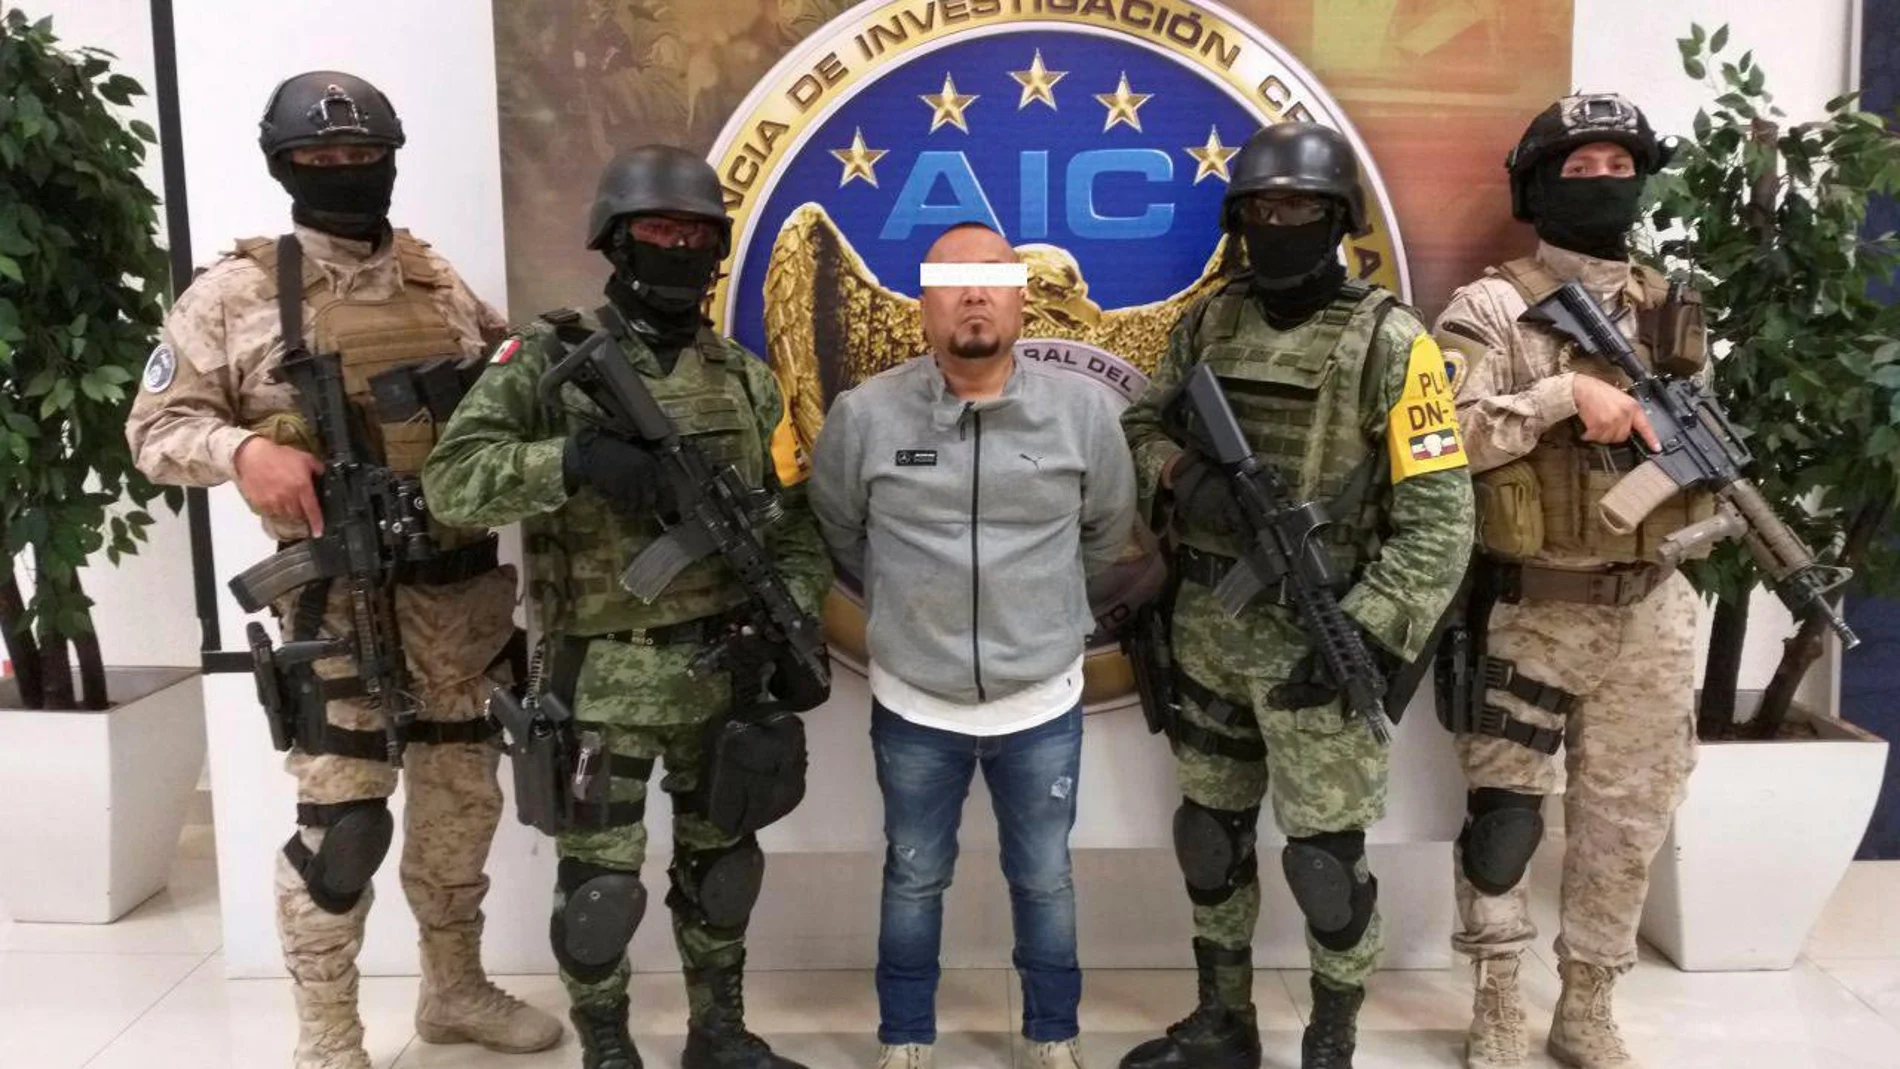 Members of the federal forces flank Jose Antonio Yepez in Guanajuato